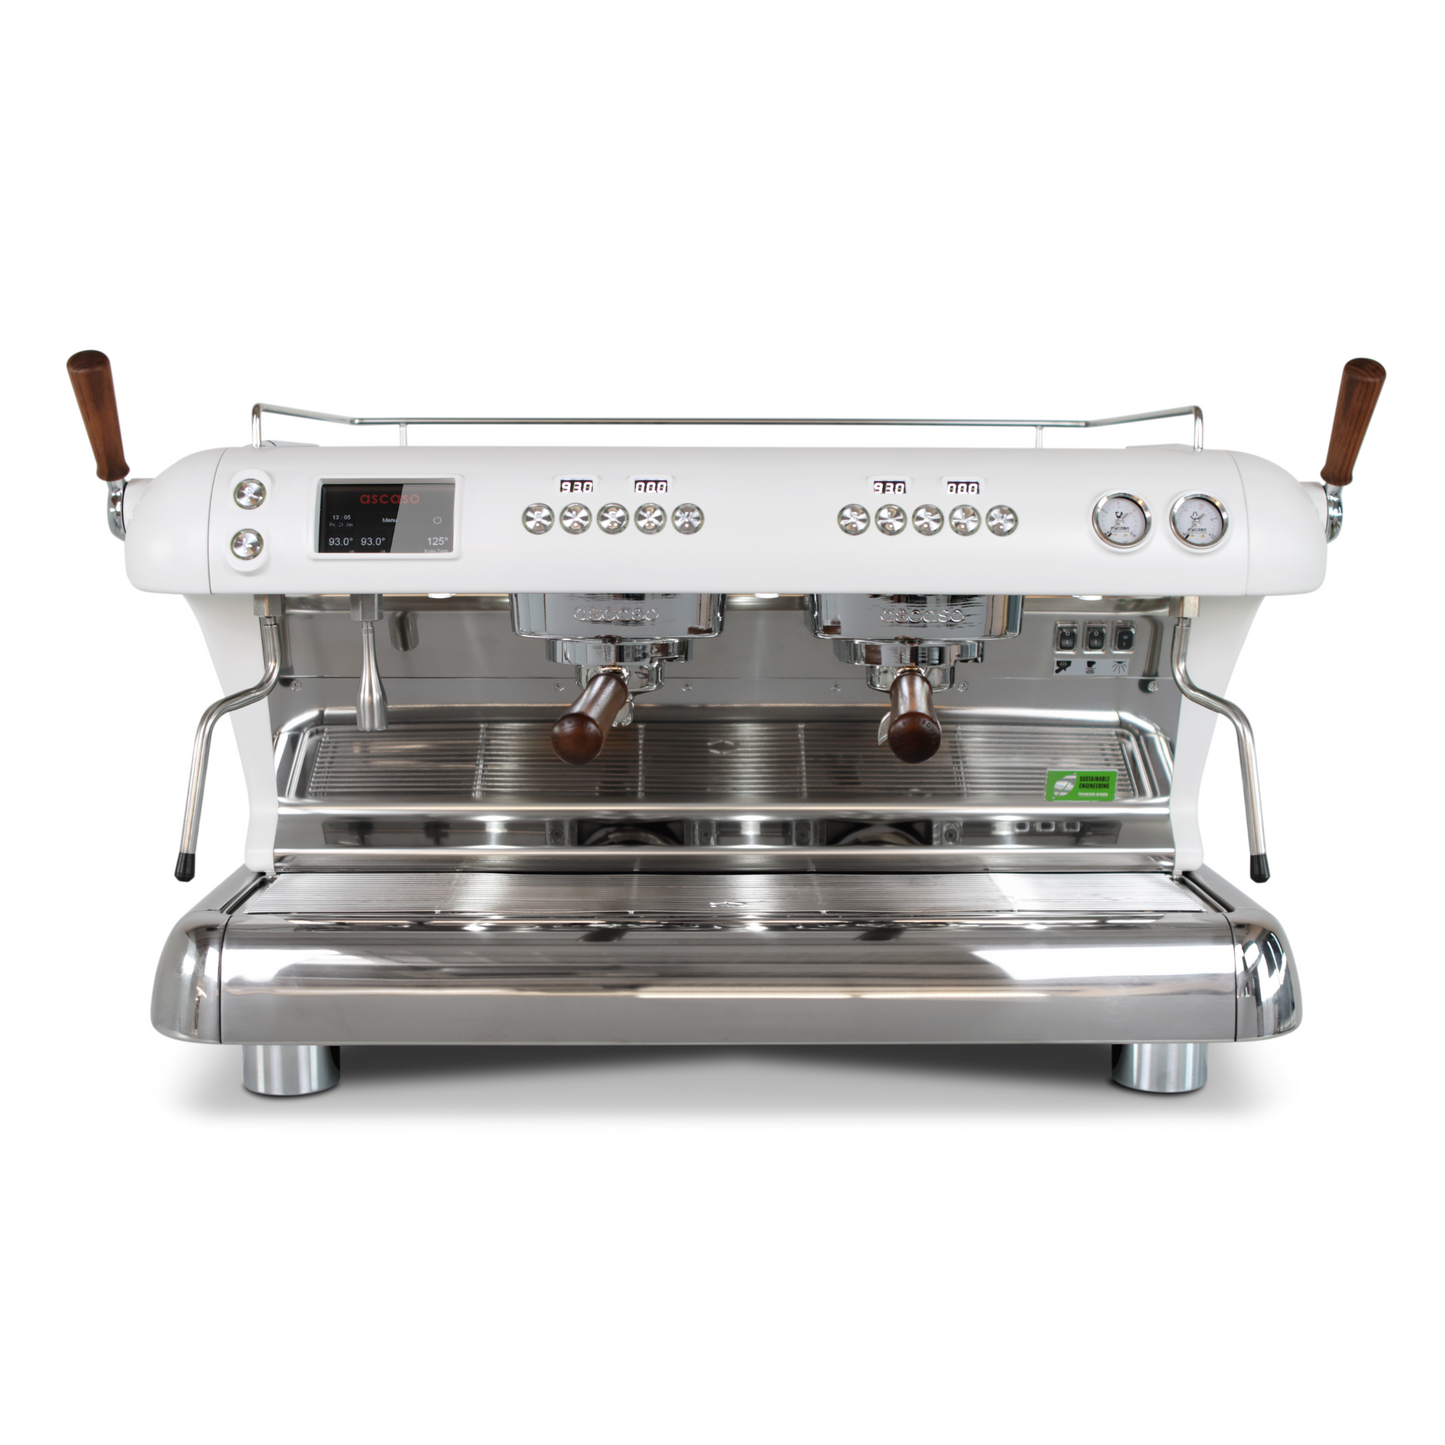 SIDEWALK SALE - Ascaso Bar 1 Group Commercial Espresso Machine - Tank Only,  110V CLEARANCE (C503)